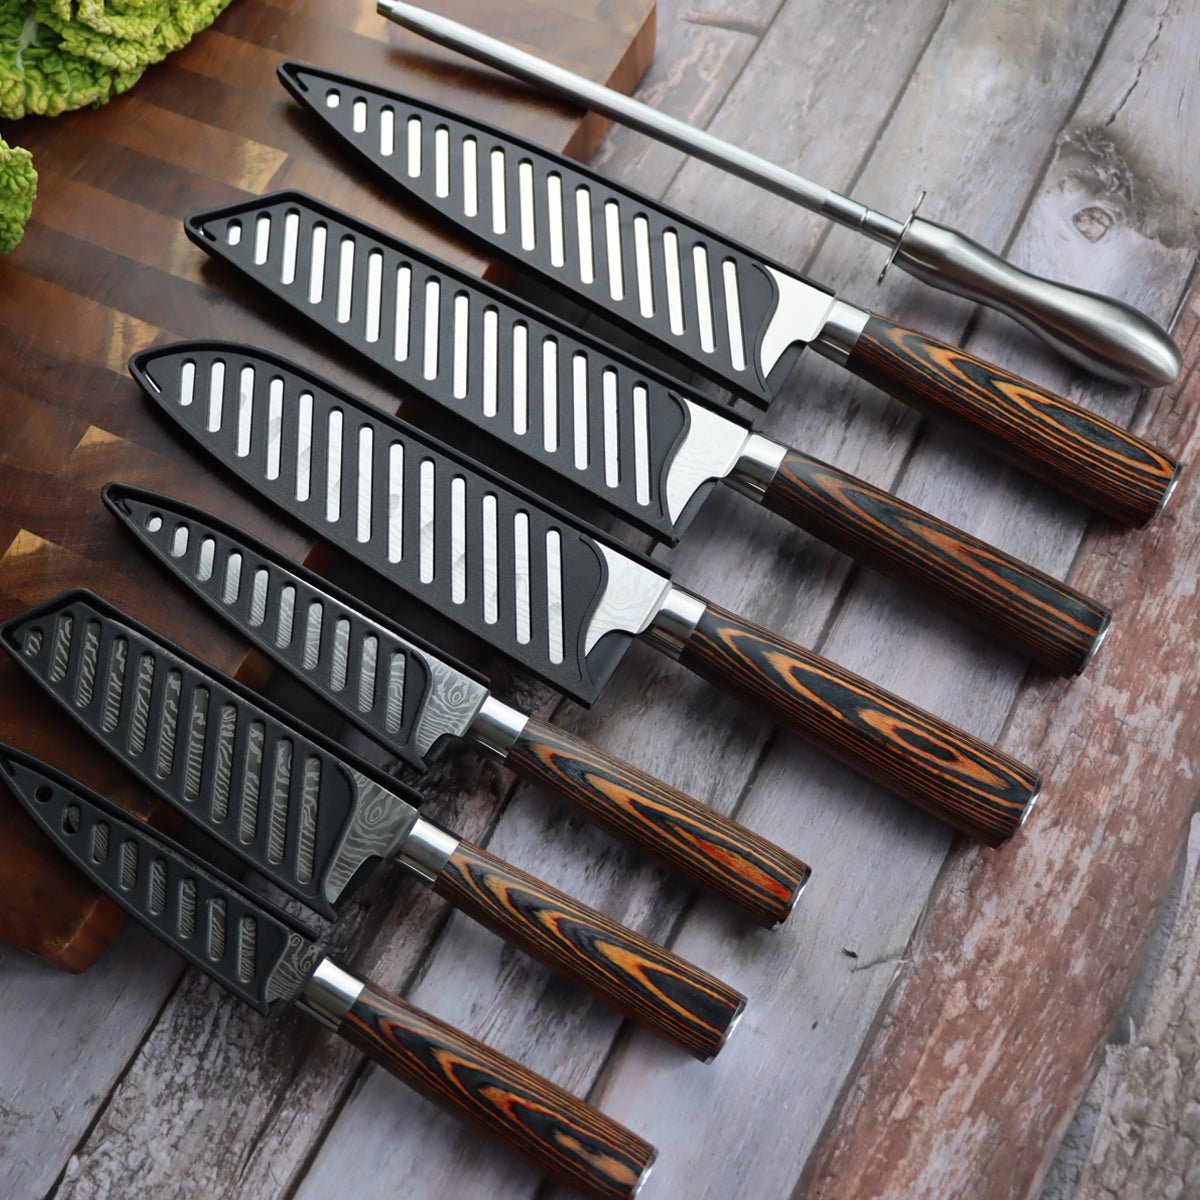 7 Piece Kitchen Knife Set With Carry Case - Letcase